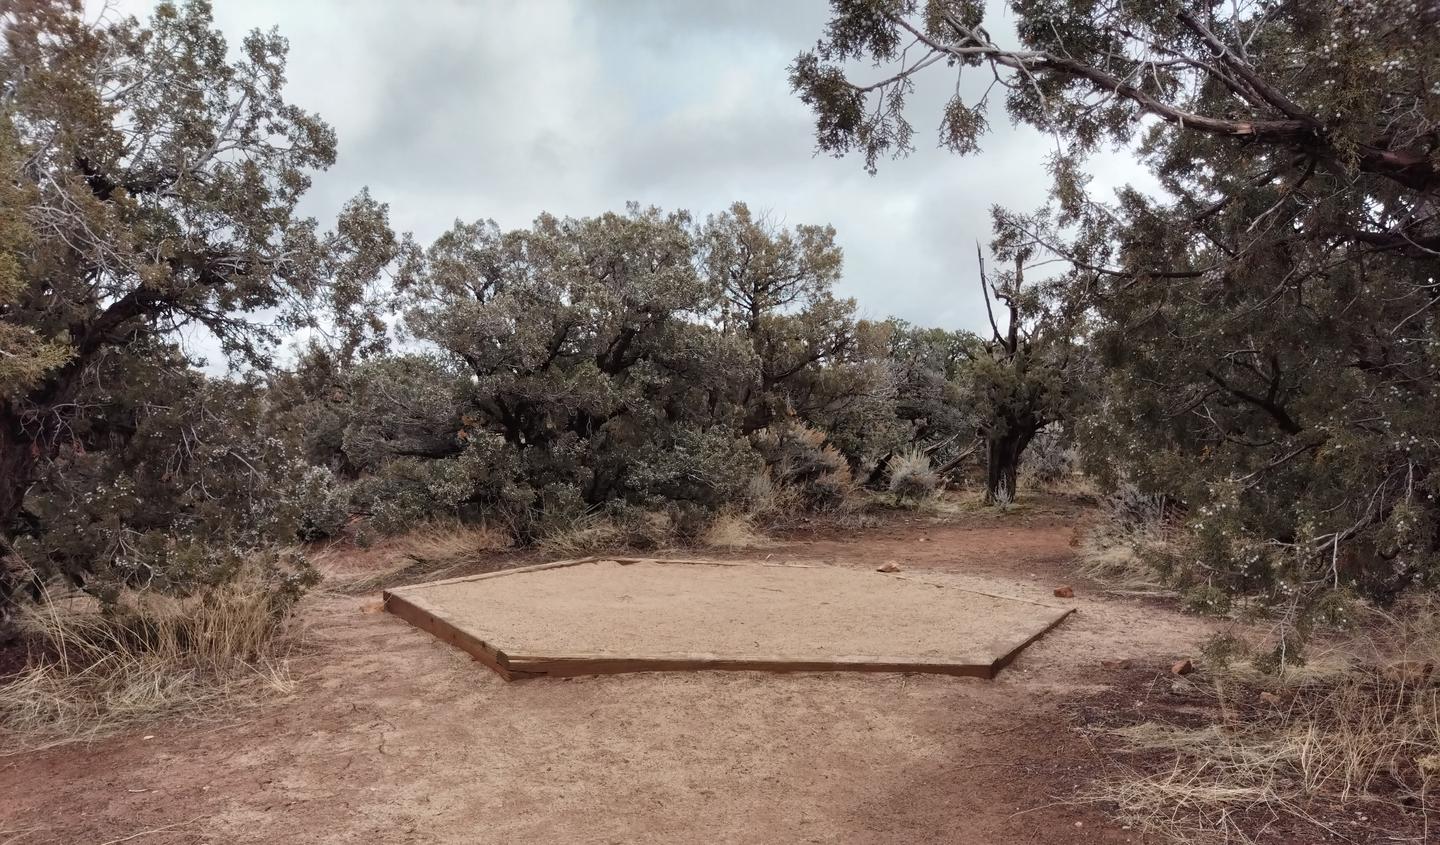 Tent pad, with a backdrop of pinon and juniperSite 4 has a tent pad, picnic table, and a metal fire ring. The site is surrounded by pinon-juniper forest.